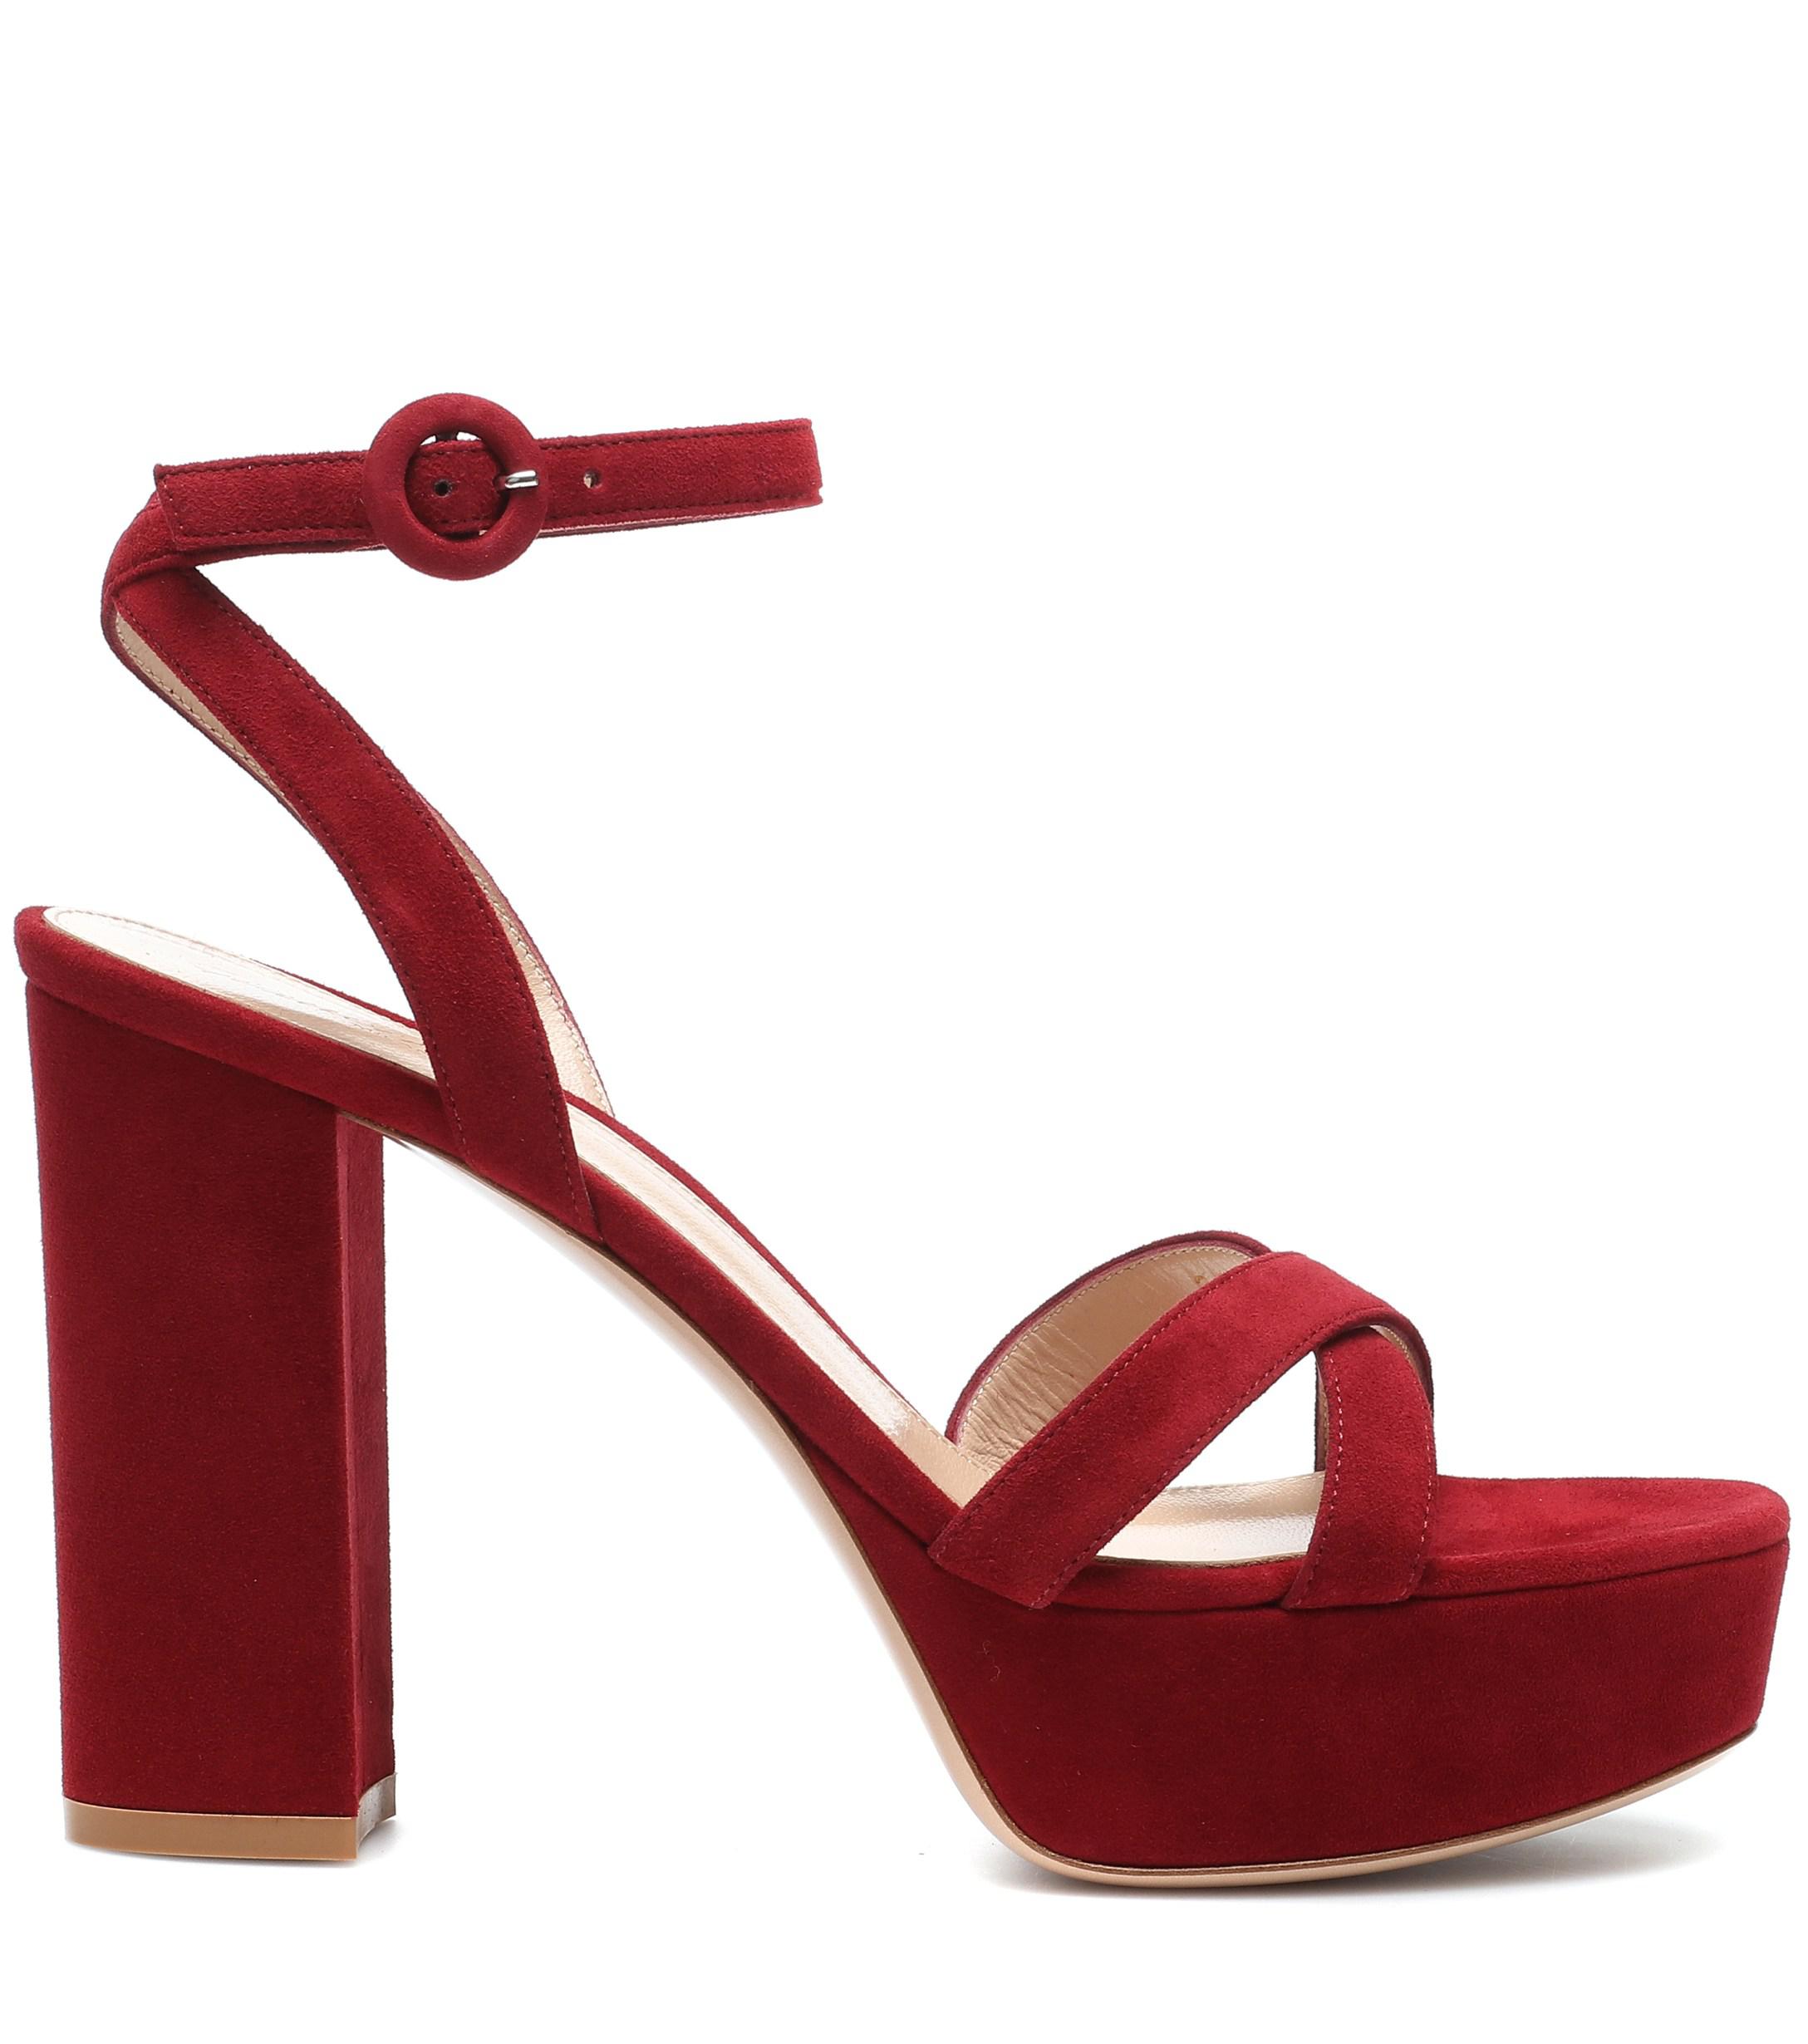 Gianvito Rossi Poppy 70 Suede Plateau Sandals in Red - Lyst